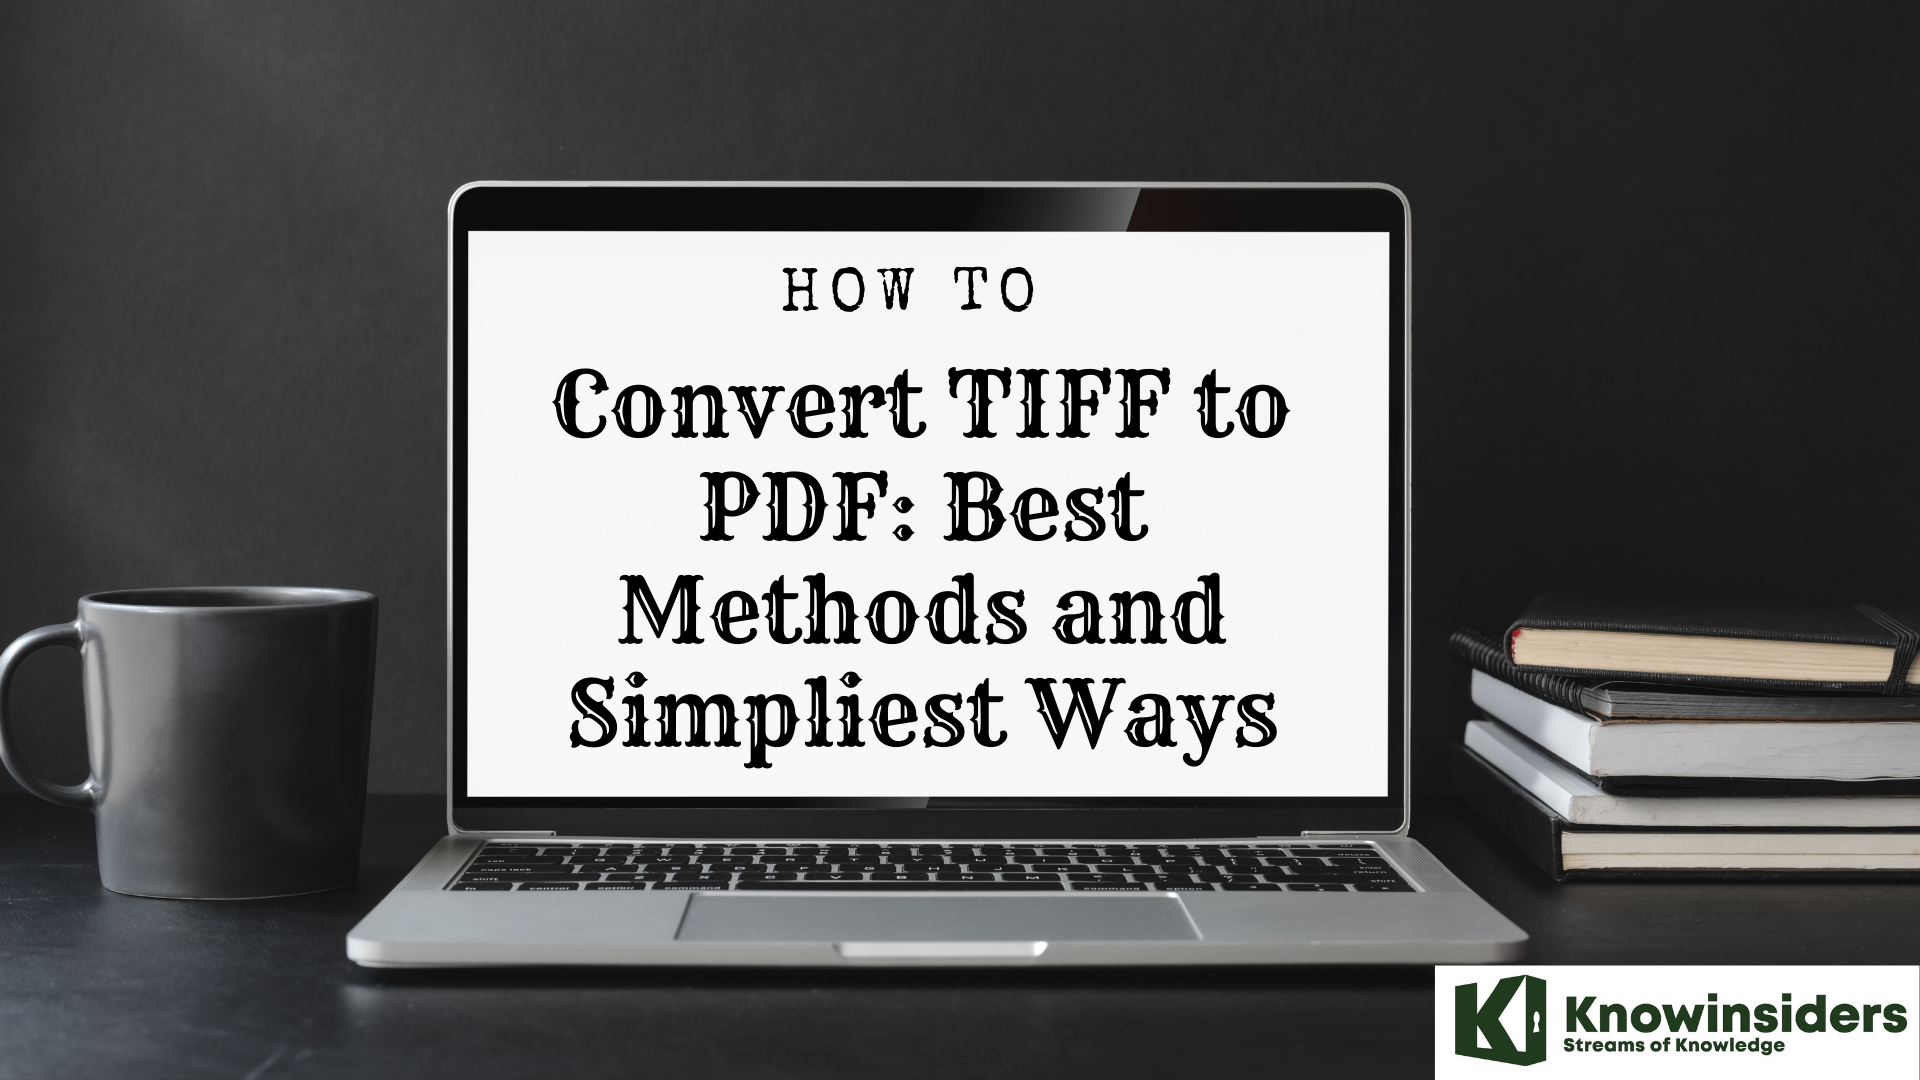 How to convert TIFF to PDF: Best Methods and Simpliest Ways 